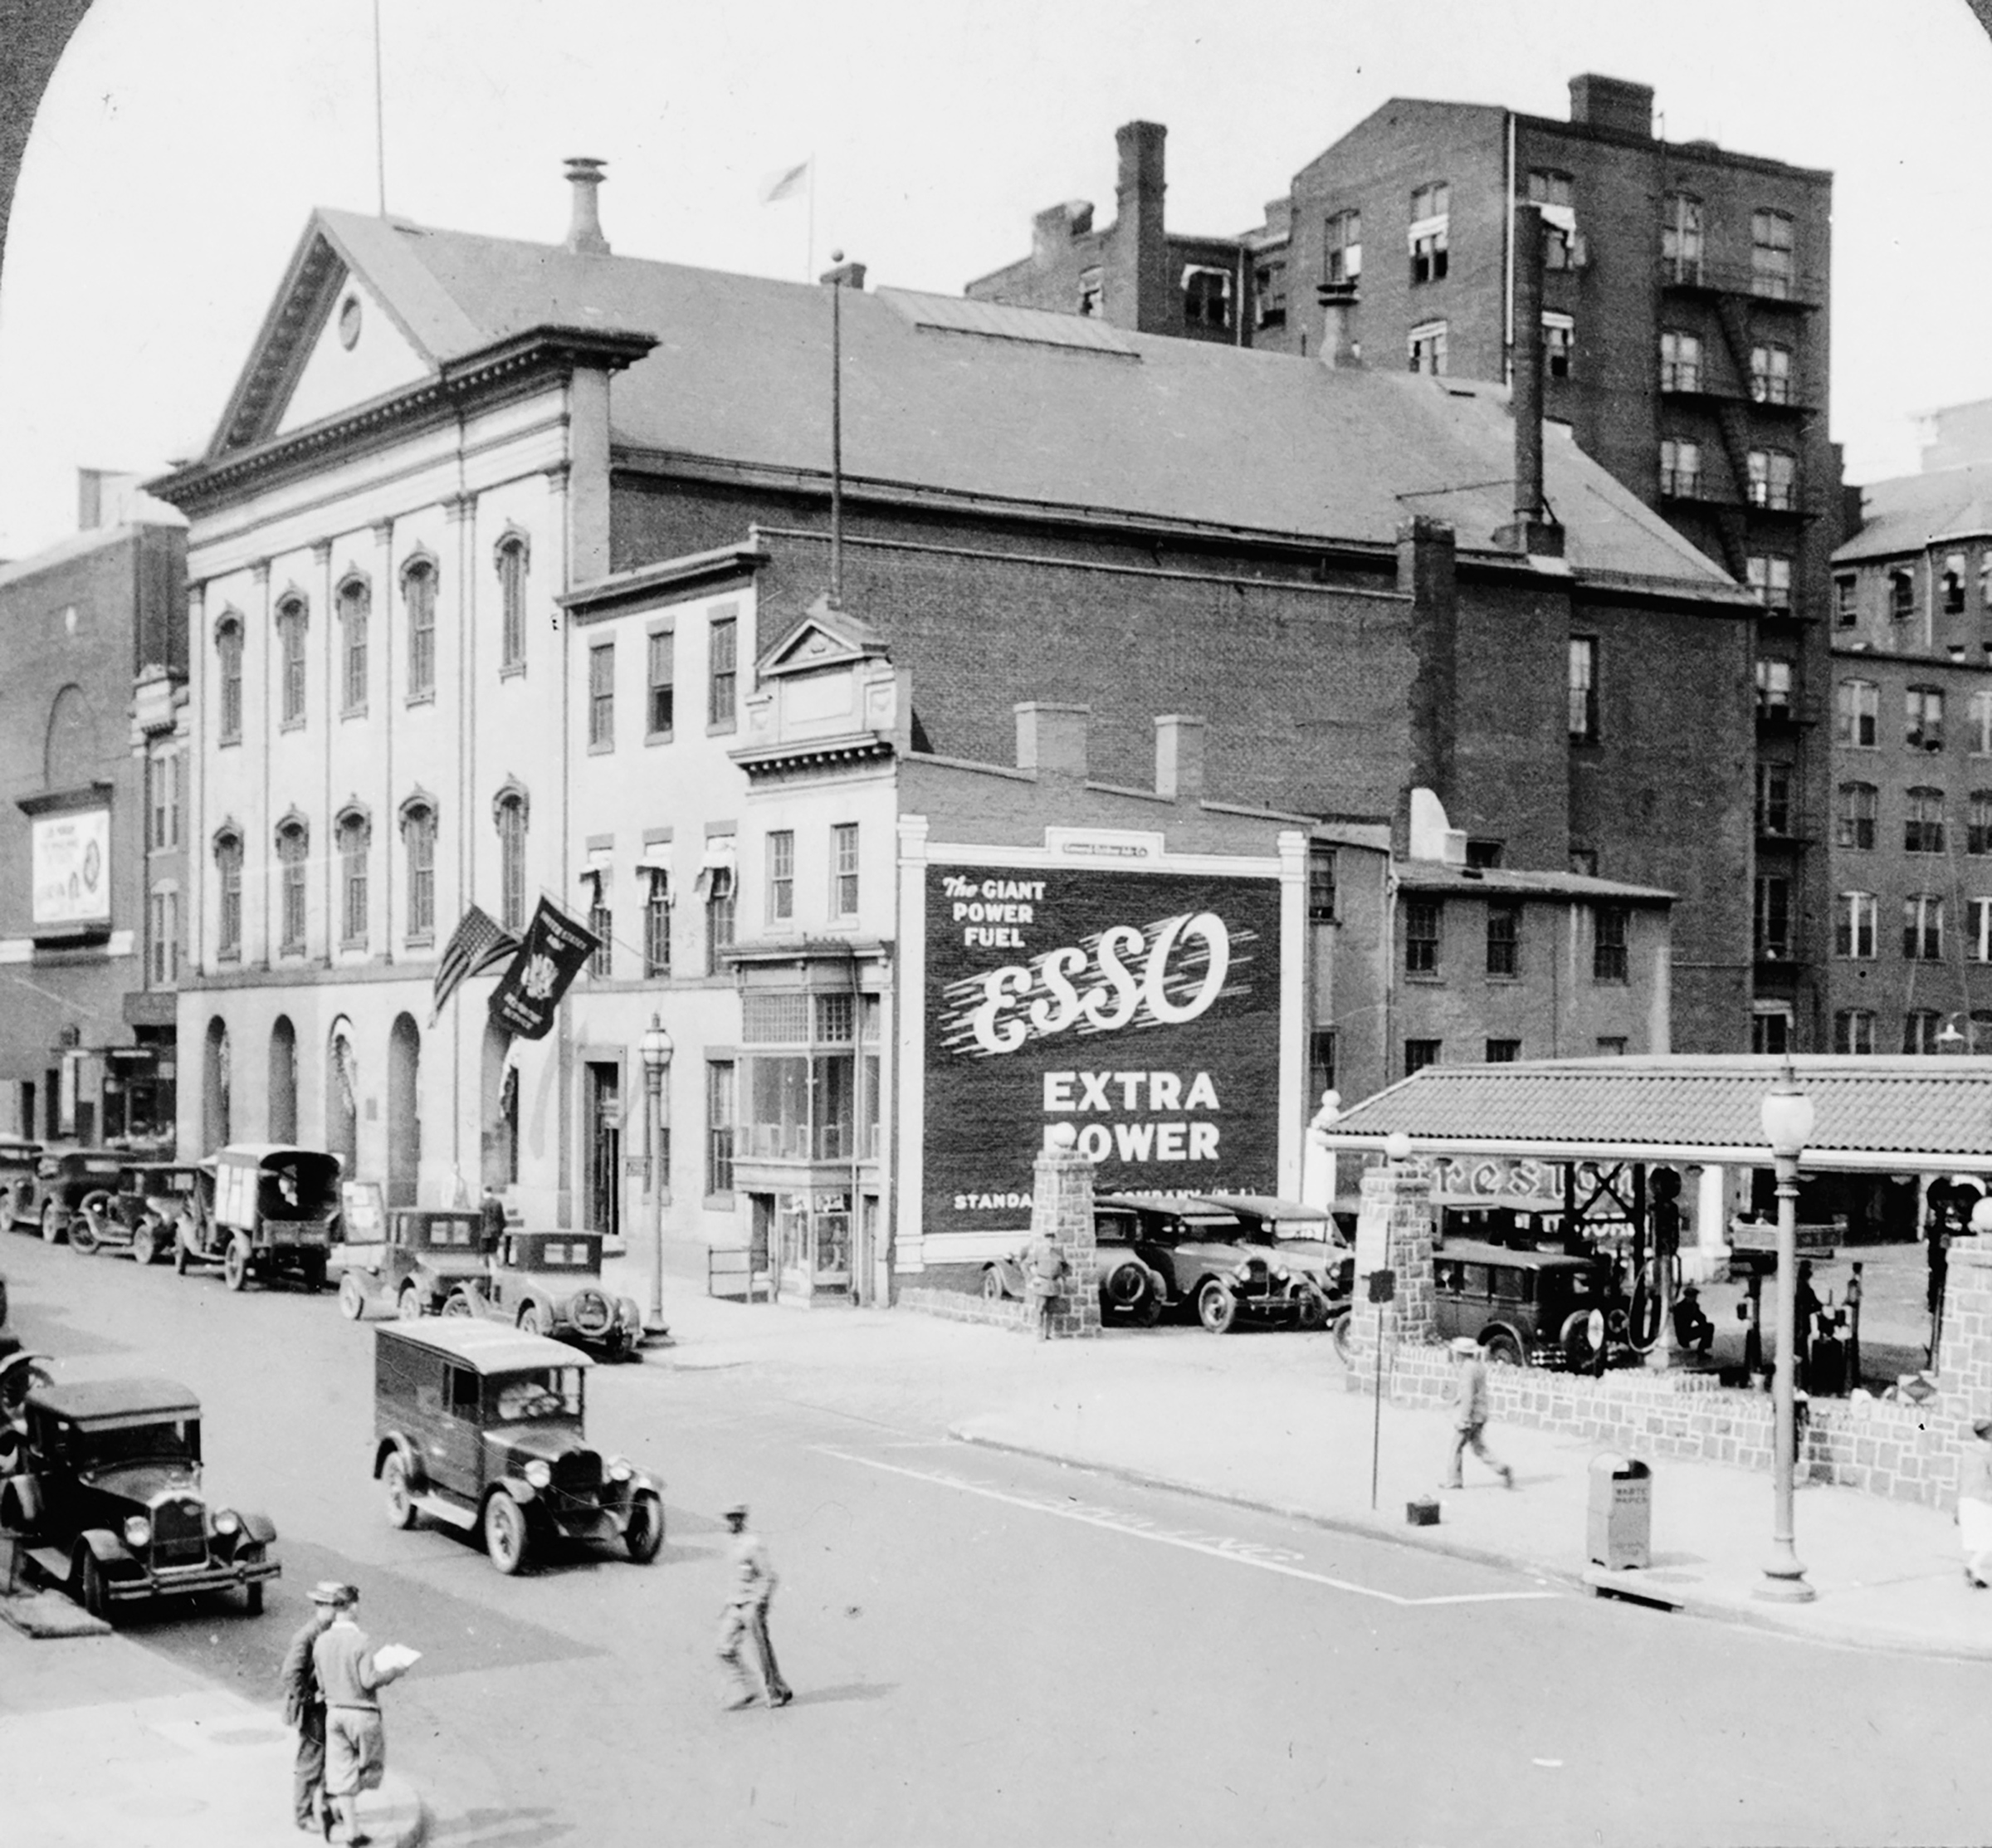 Ford’s Theatre in Washington, D.C., seen in the 1920s